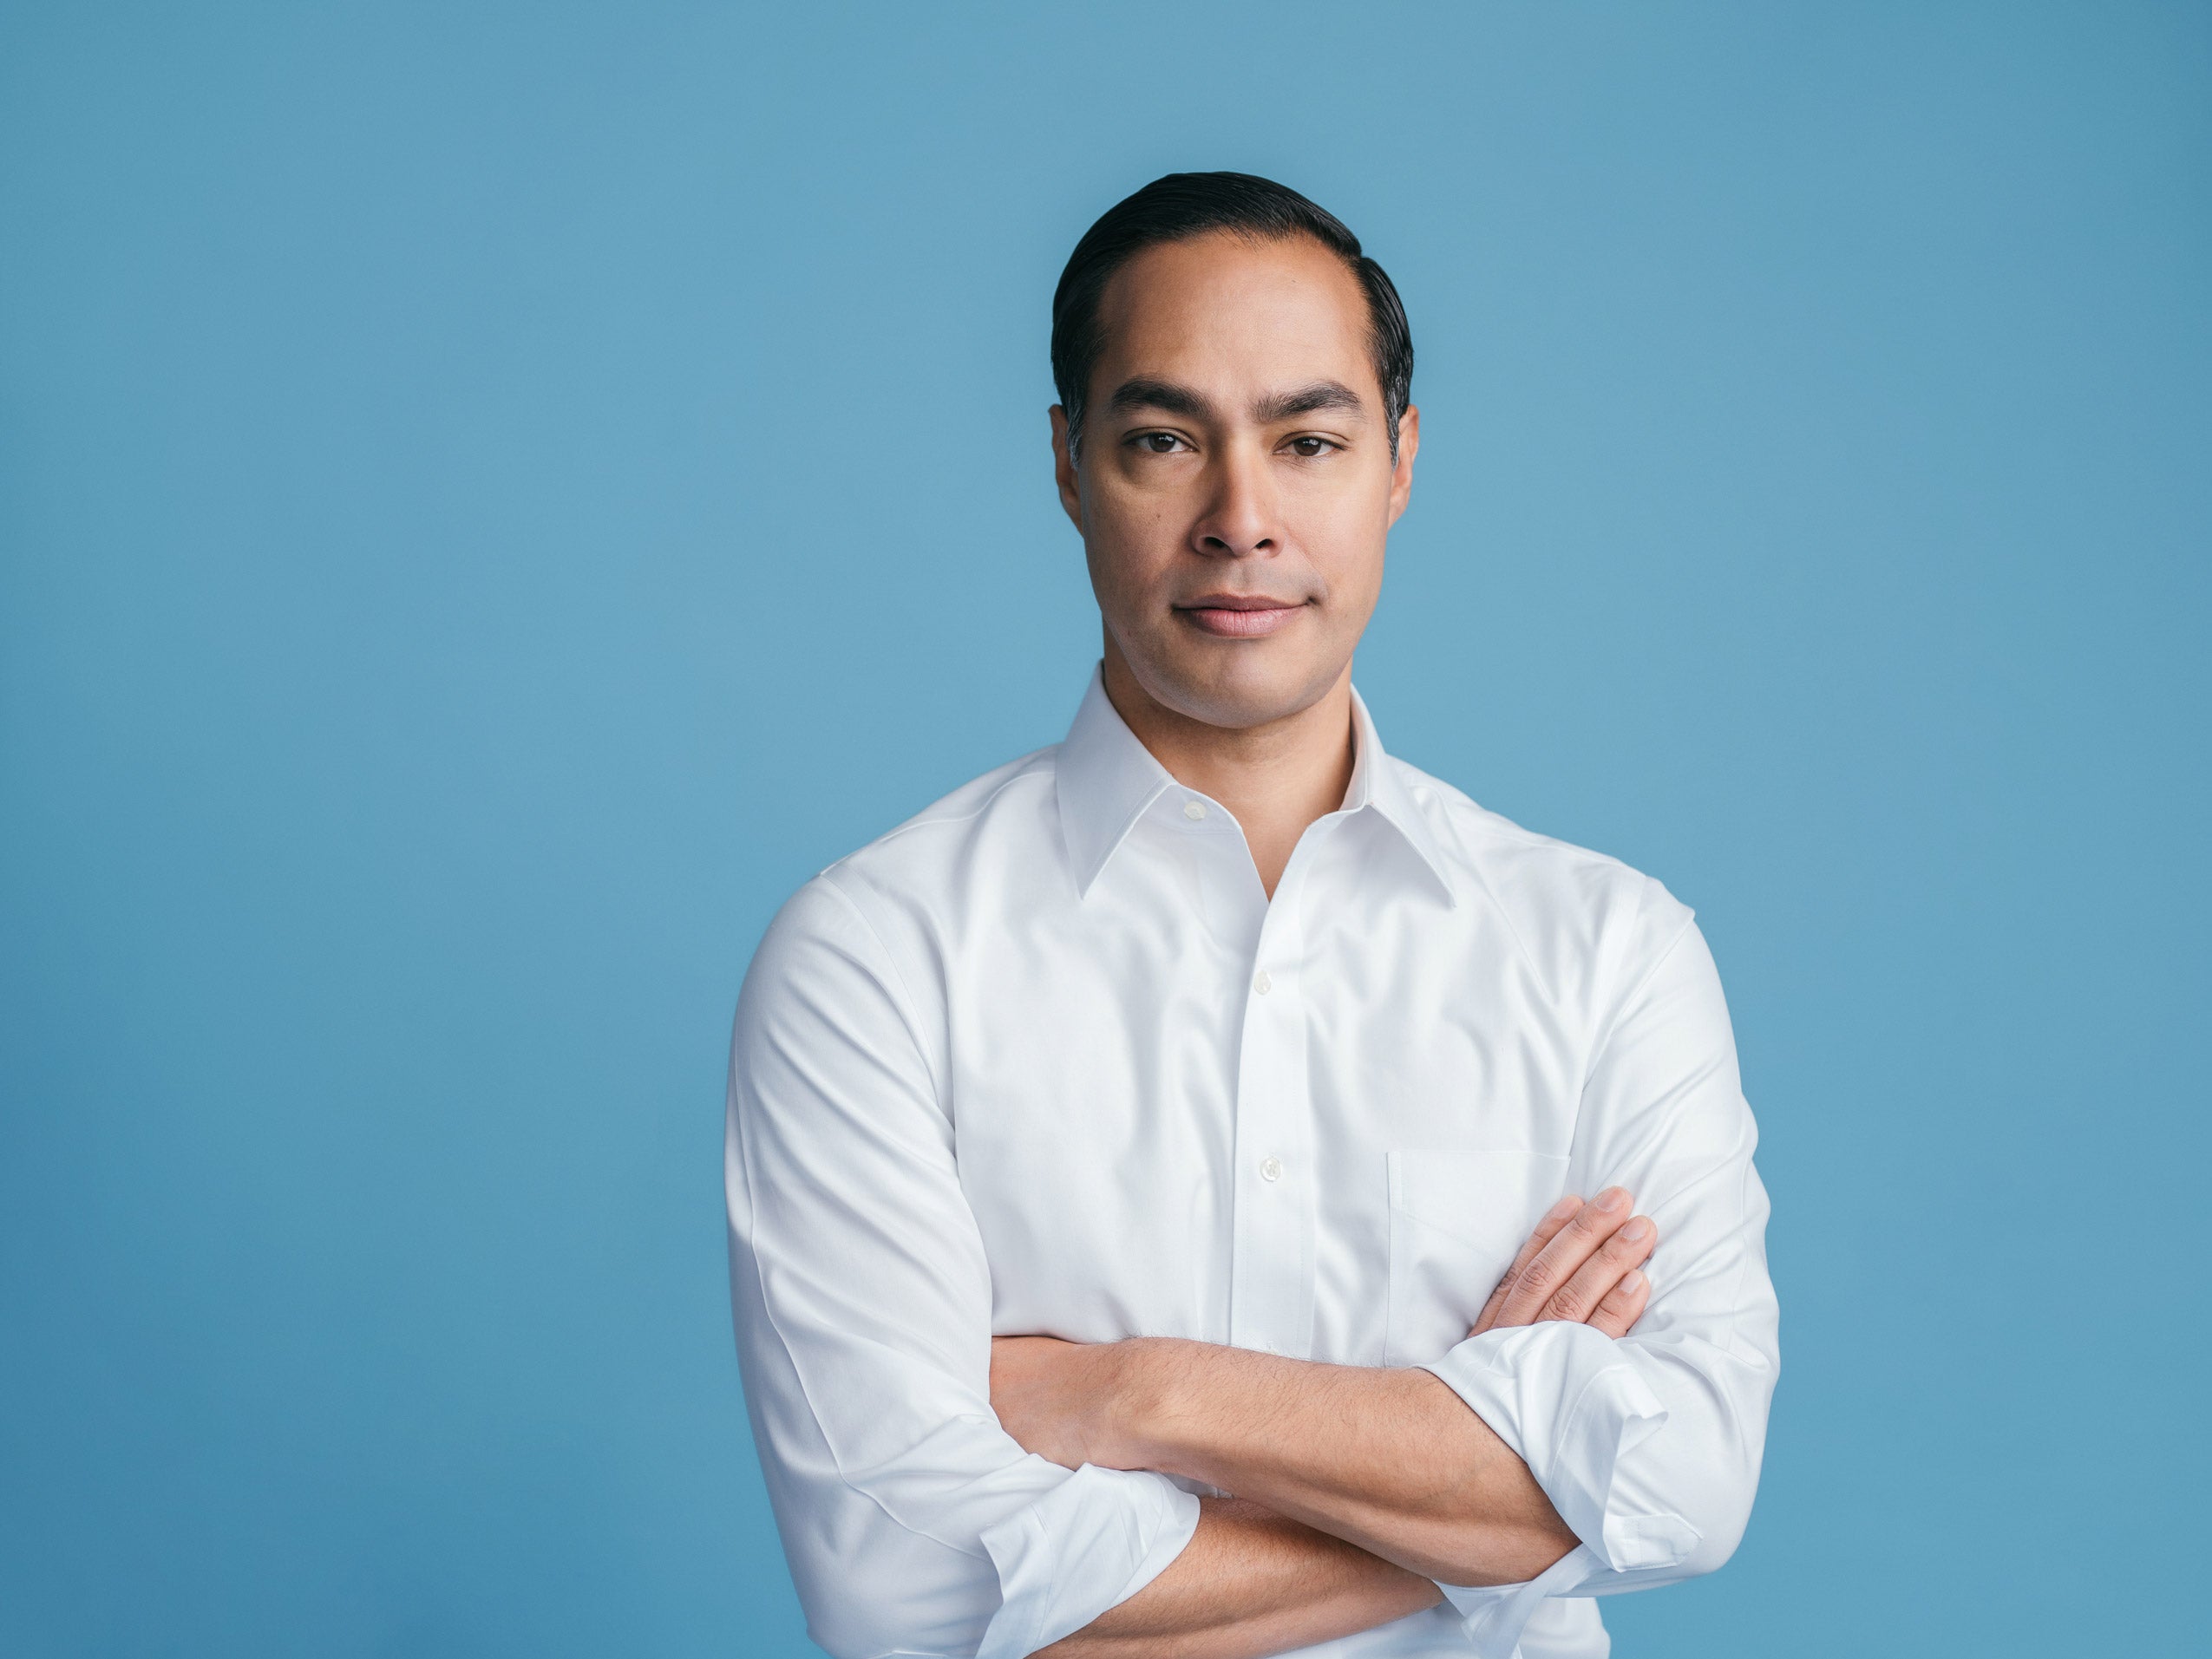 Portrait of Julian Castro wearing a white shirt with arms crossed